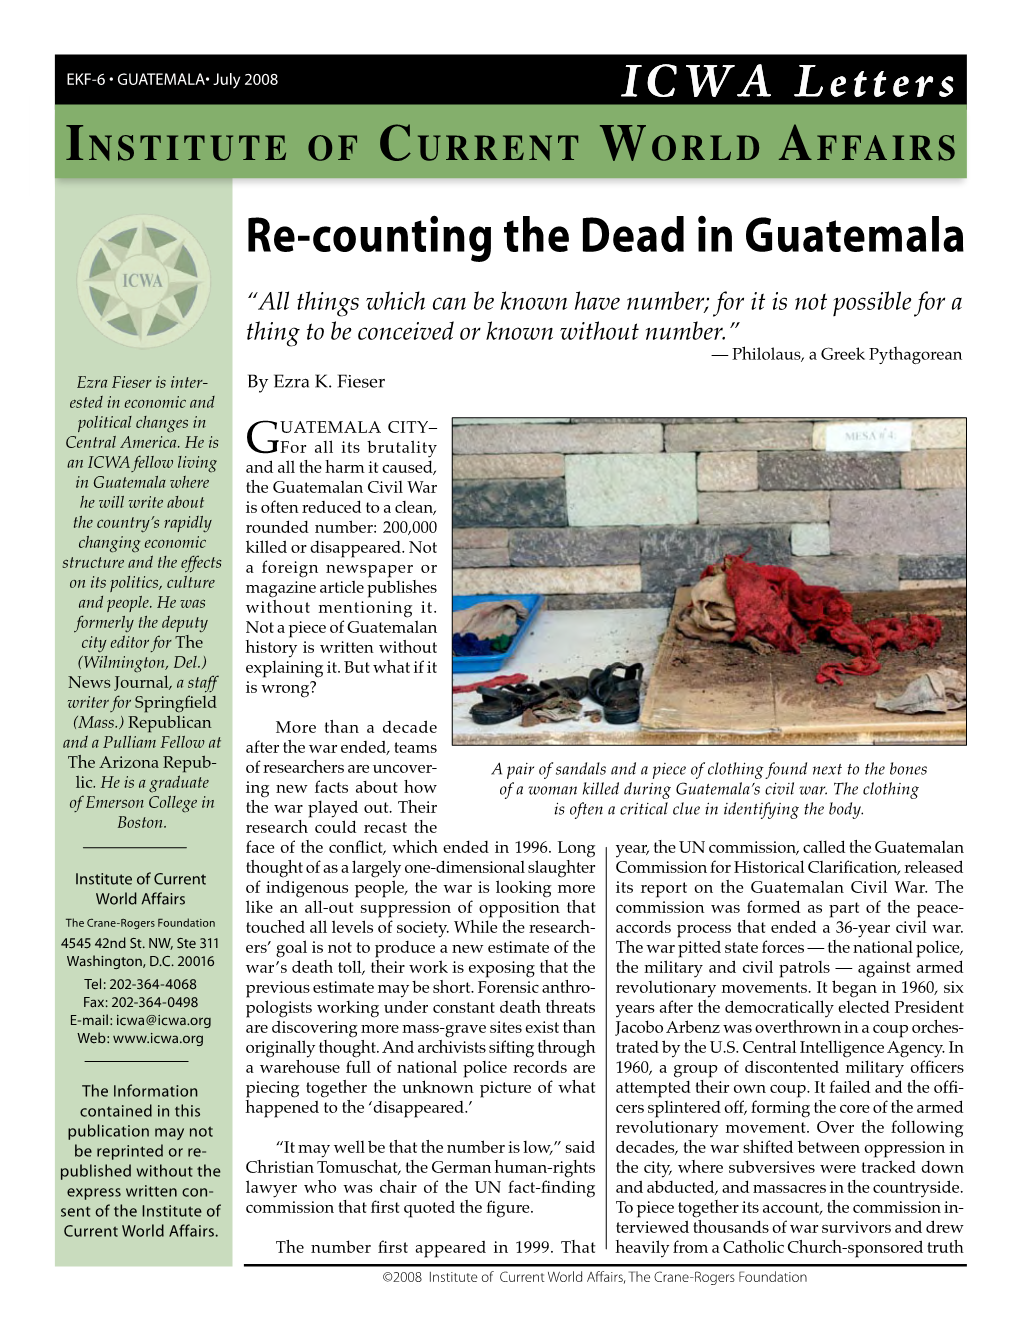 Re-Counting the Dead in Guatemala